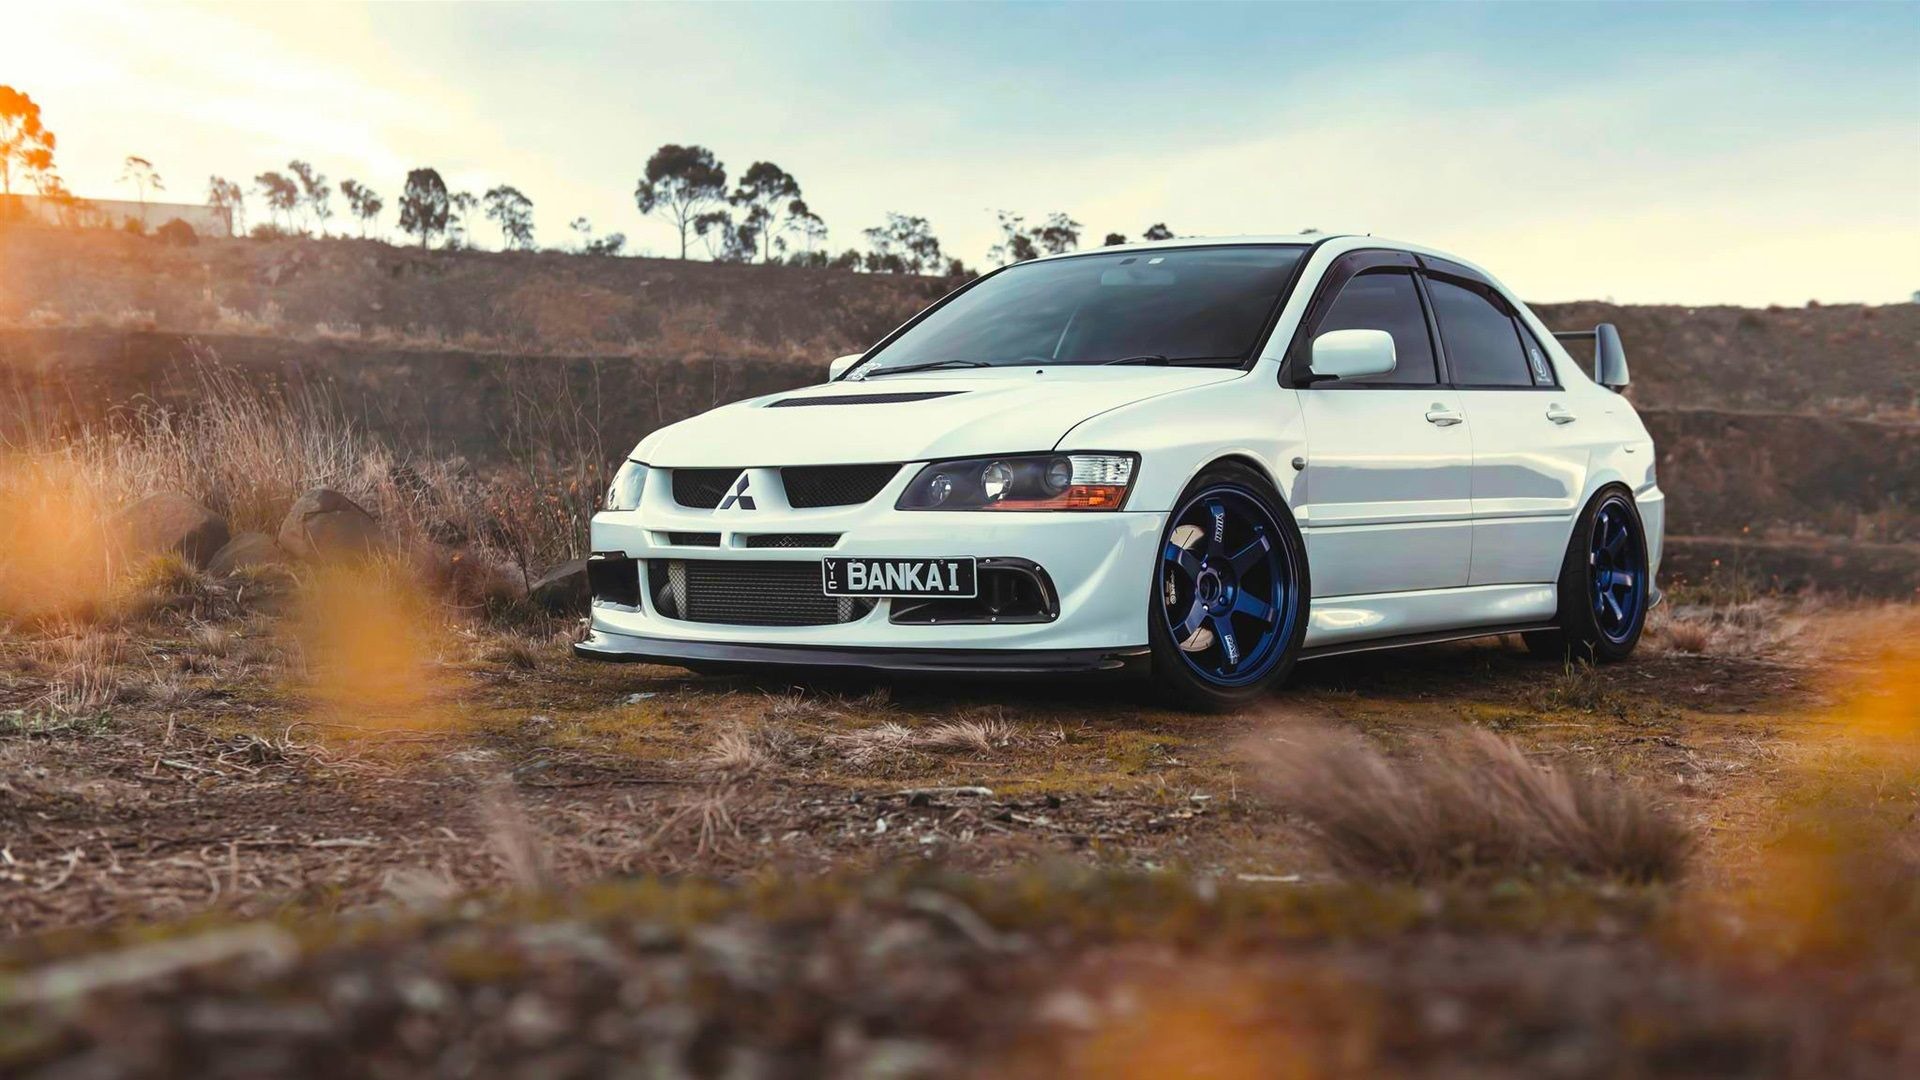 Lancer Evo 9 Wallpapers  Top Free Lancer Evo 9 Backgrounds   WallpaperAccess